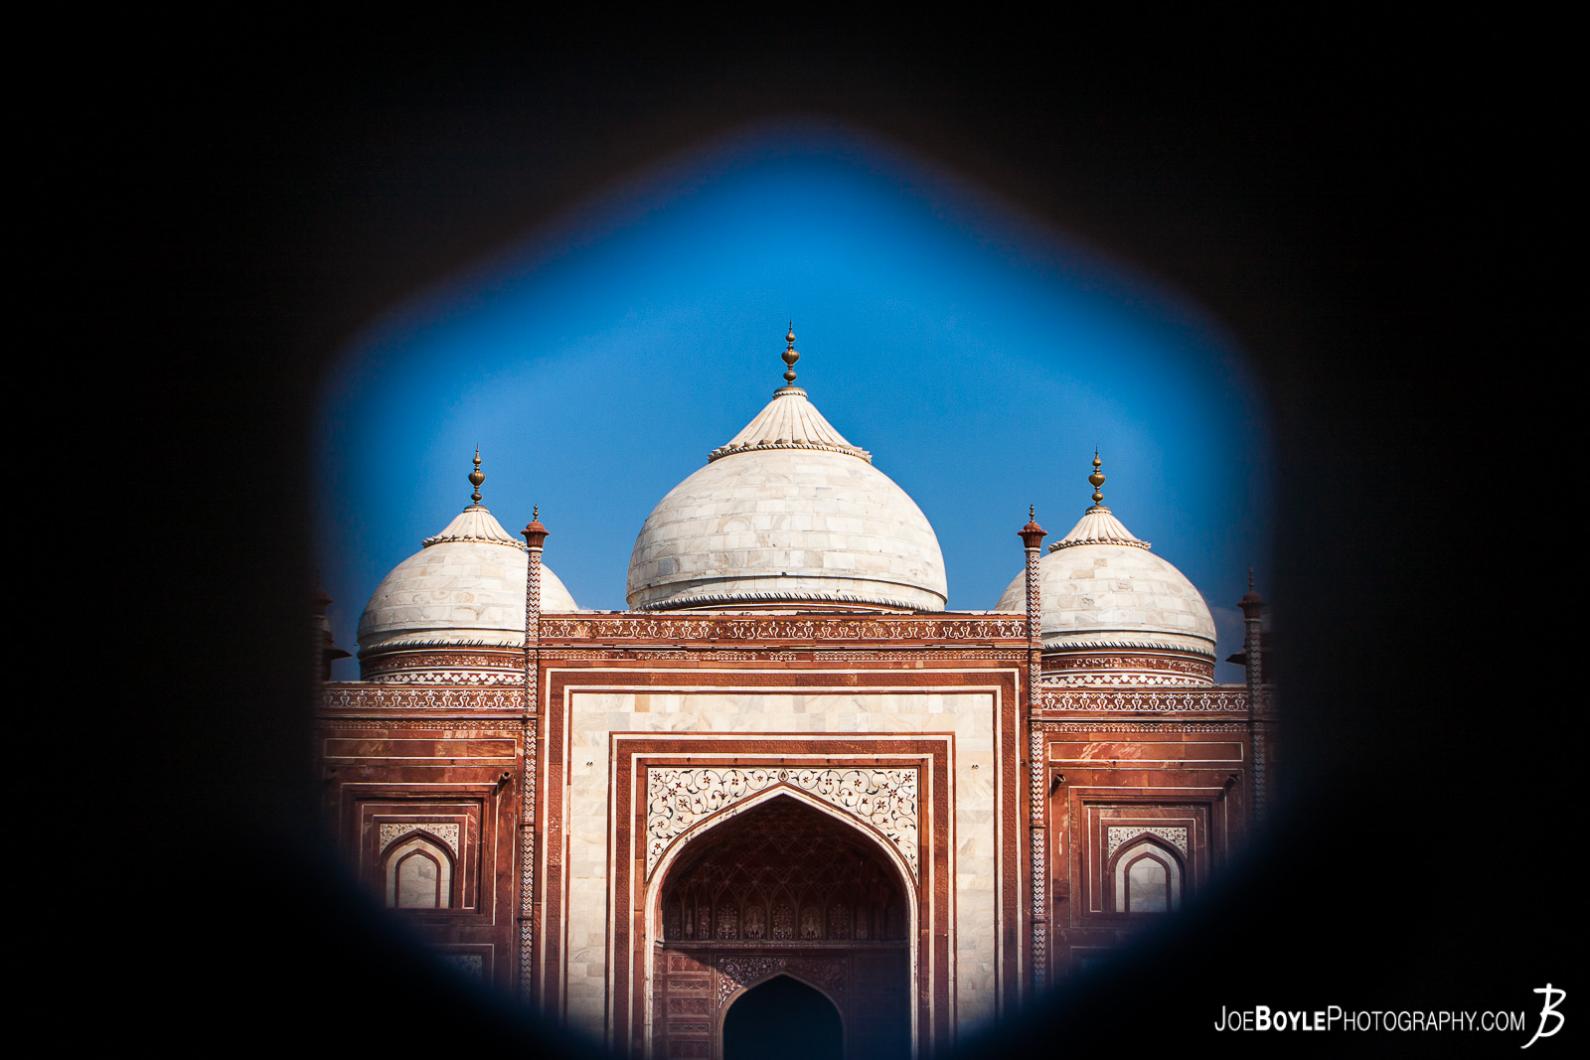 This picture is from the inside of the Taj Mahal looking at 1 of two mosques that are built right next to the Taj Mahal.